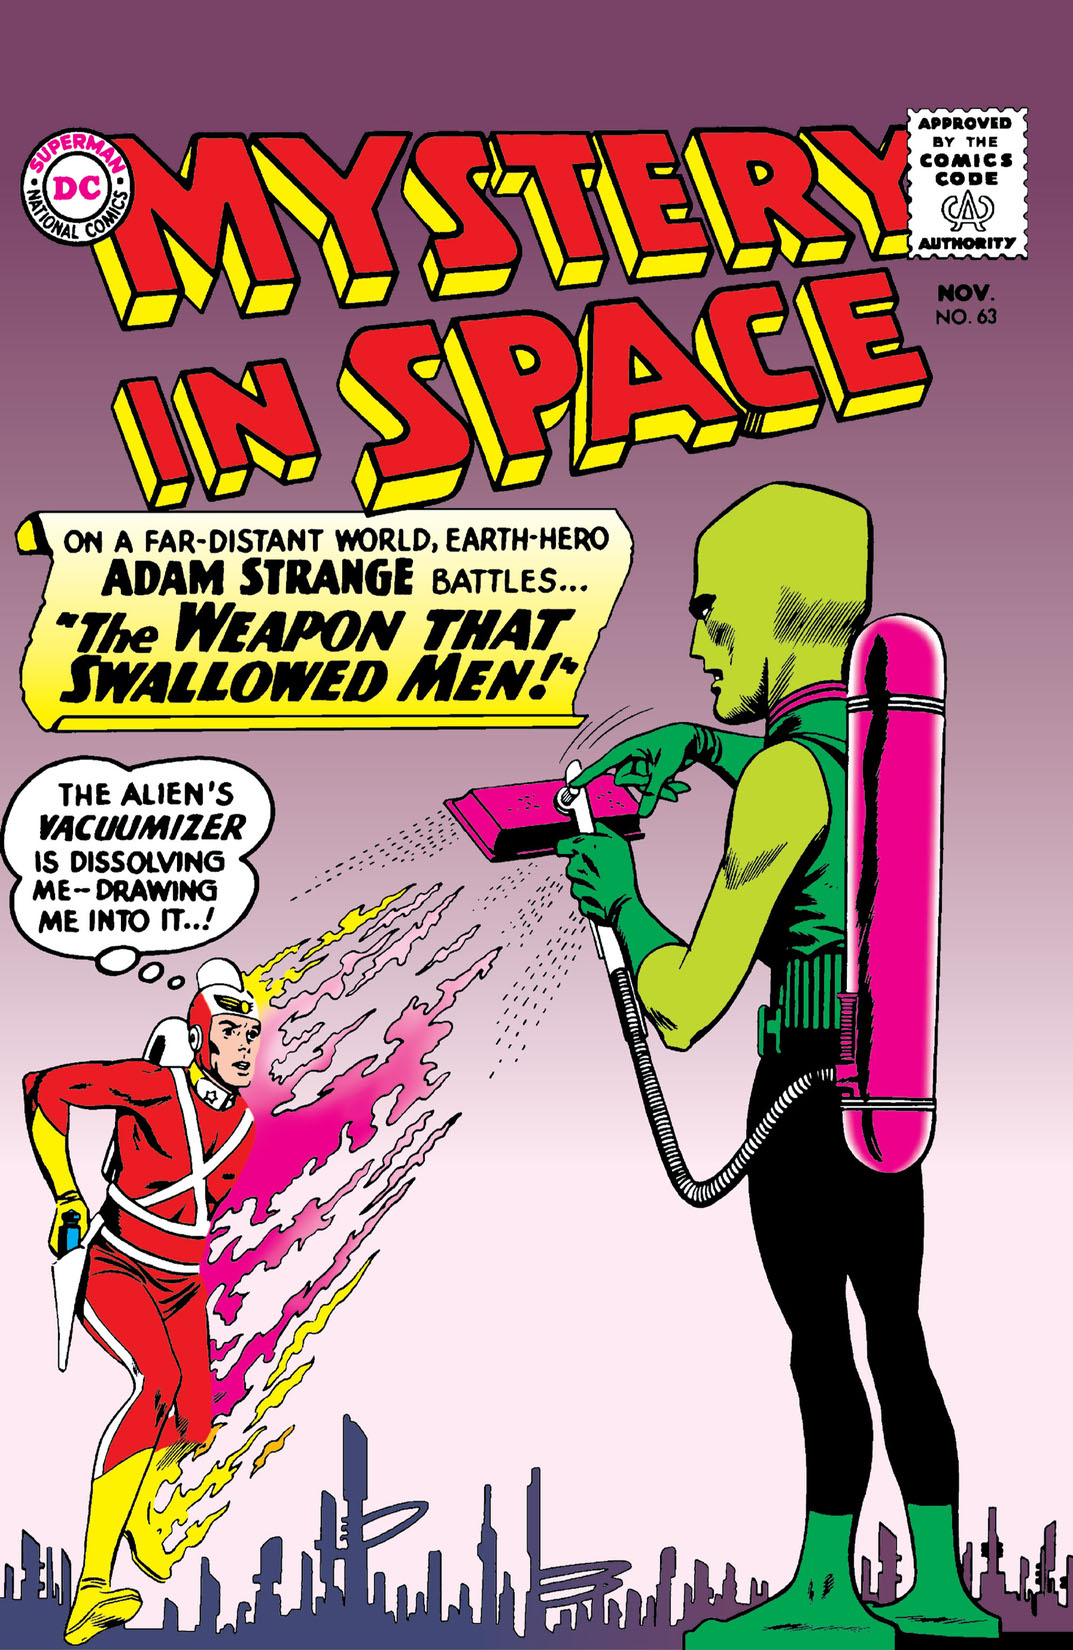 Mystery in Space (1951-) #63 preview images